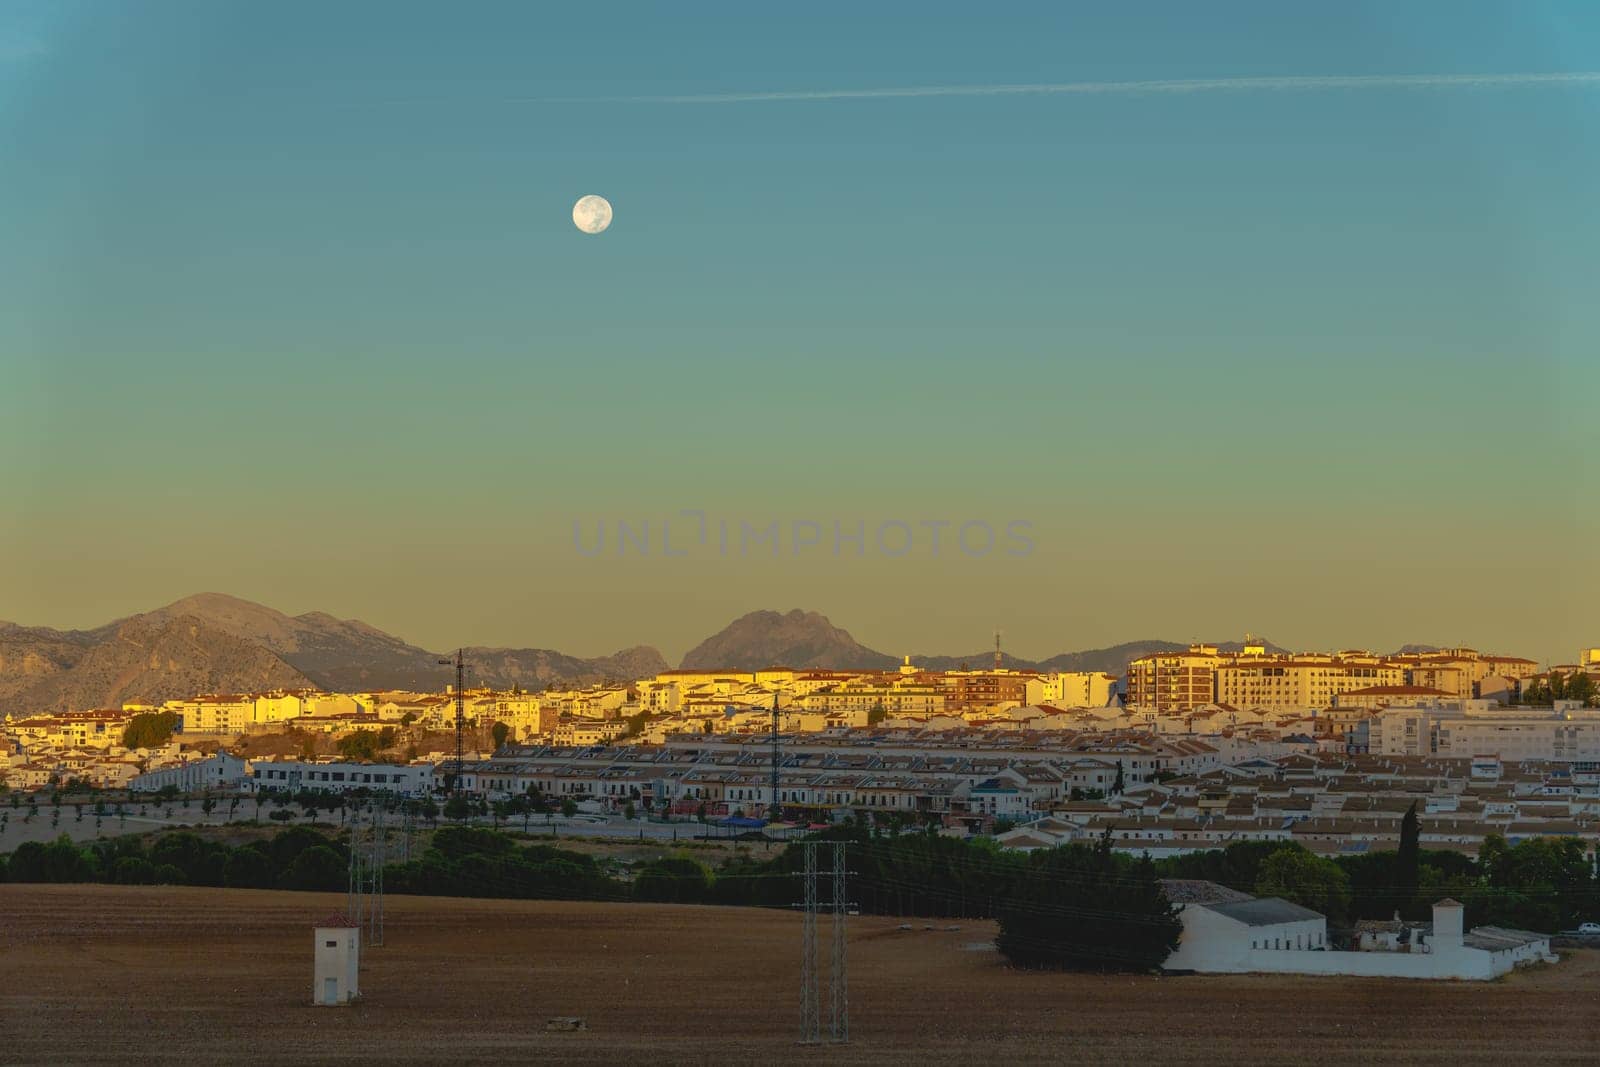 sunrise cityscape with reddish and blue tones with a full moon in the sky